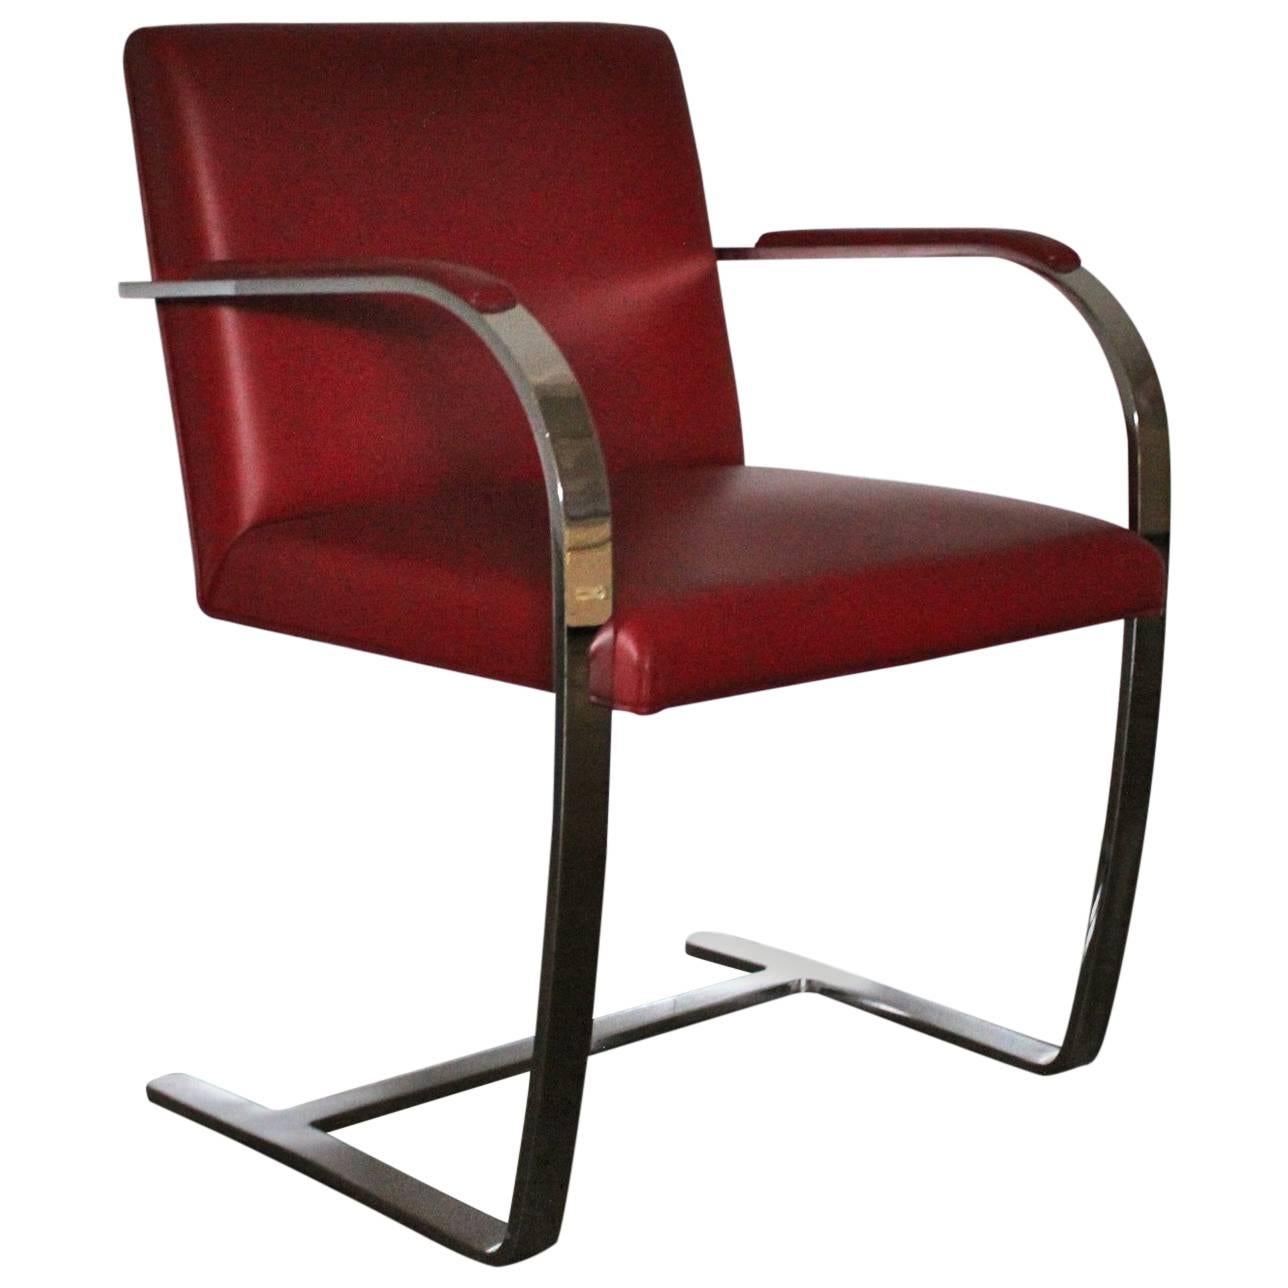 Knoll Studio "Brno Flat Bar" Lounge Armchair in Red Leather by Mies van der Rohe